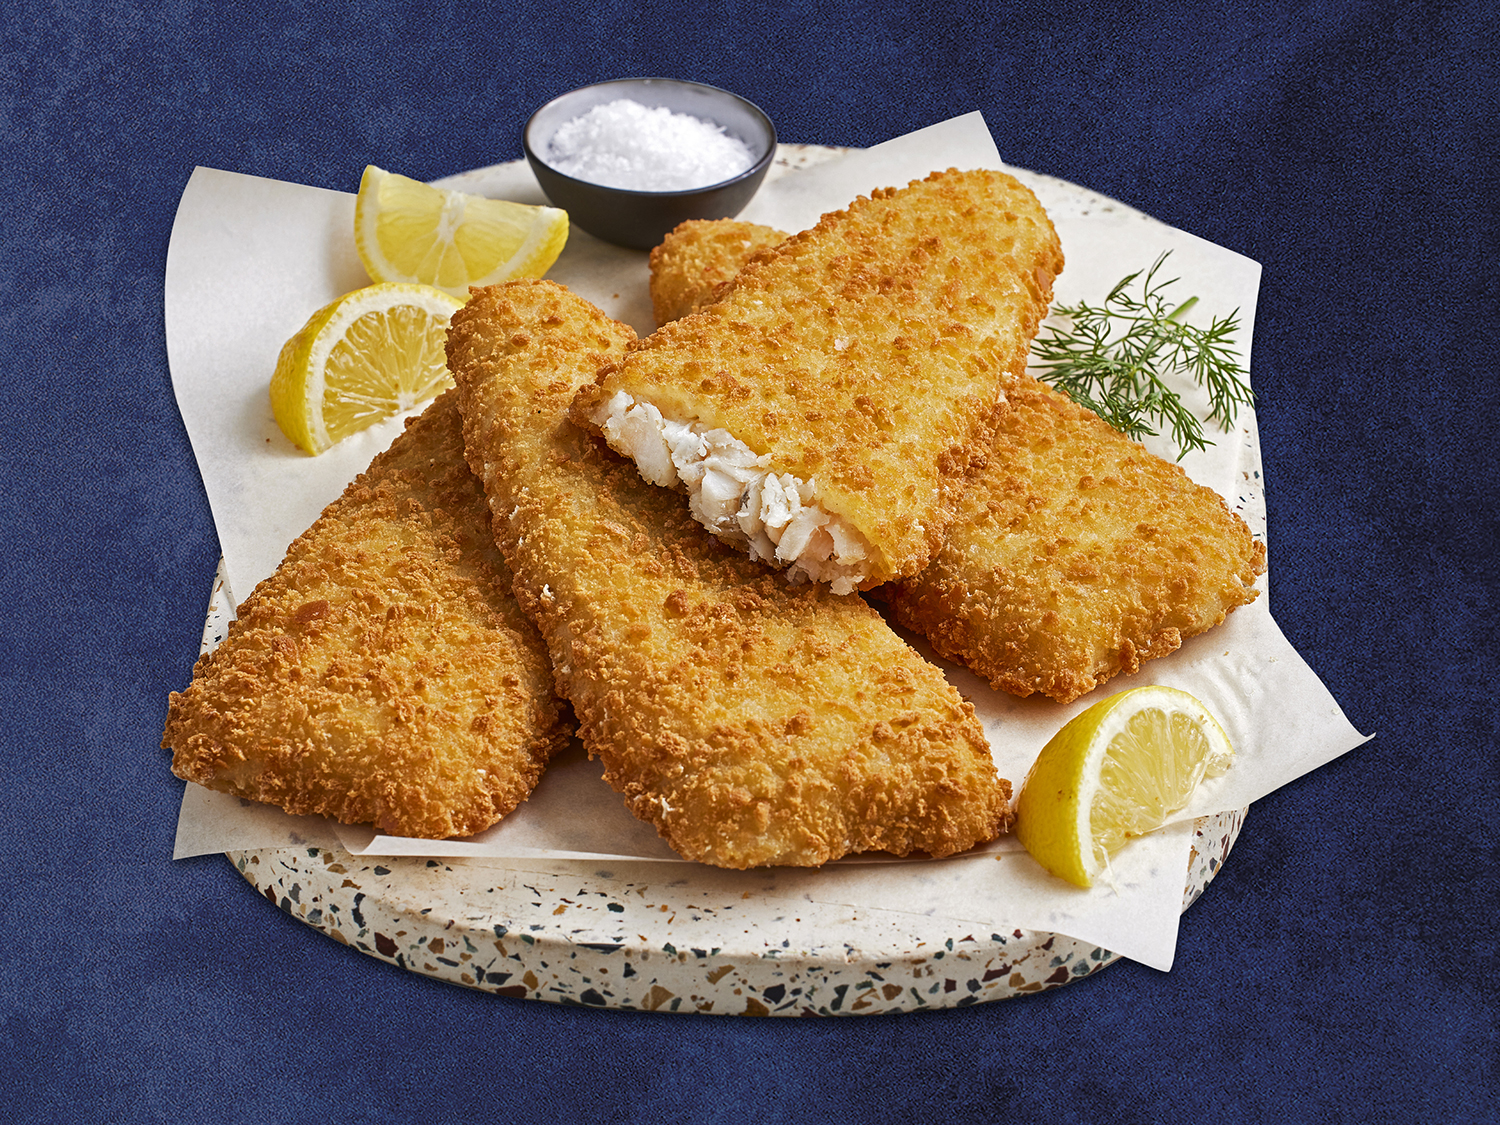 CRUMBED FISH FILLET PORTIONS